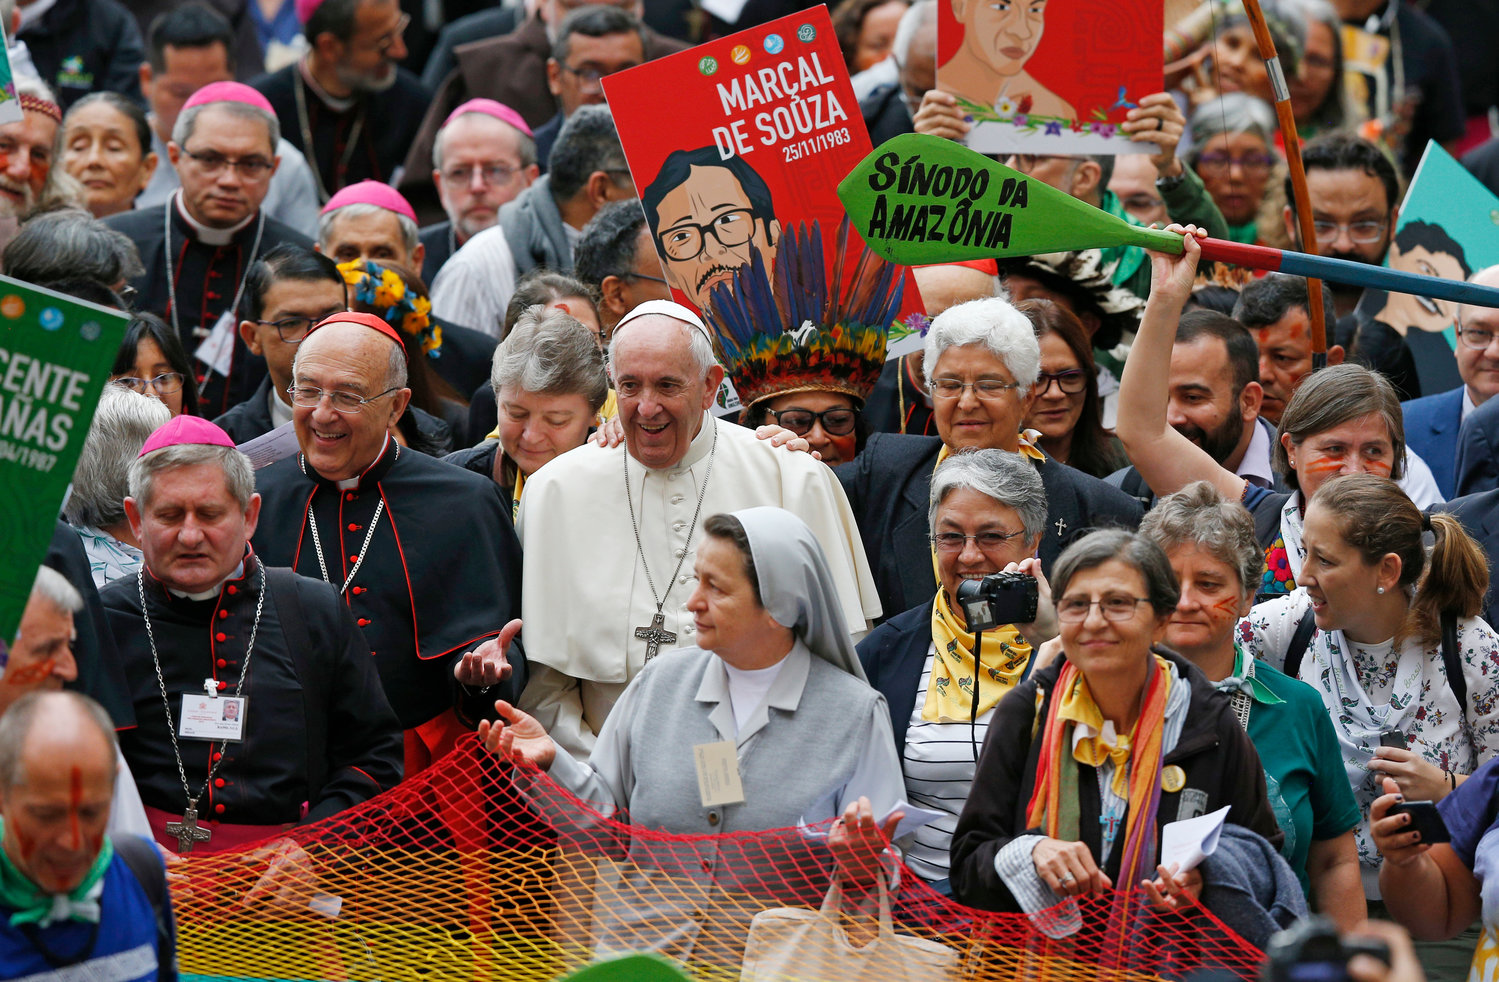 Pope Francis walks in a procession at the start of the first session of the Synod of Bishops for the Amazon at the Vatican in this Oct. 7, 2019, file photo. The Vatican on Feb. 12 released the Pope’s apostolic exhortation, “Querida Amazonia” (Beloved Amazonia), which offers his conclusions from the synod.